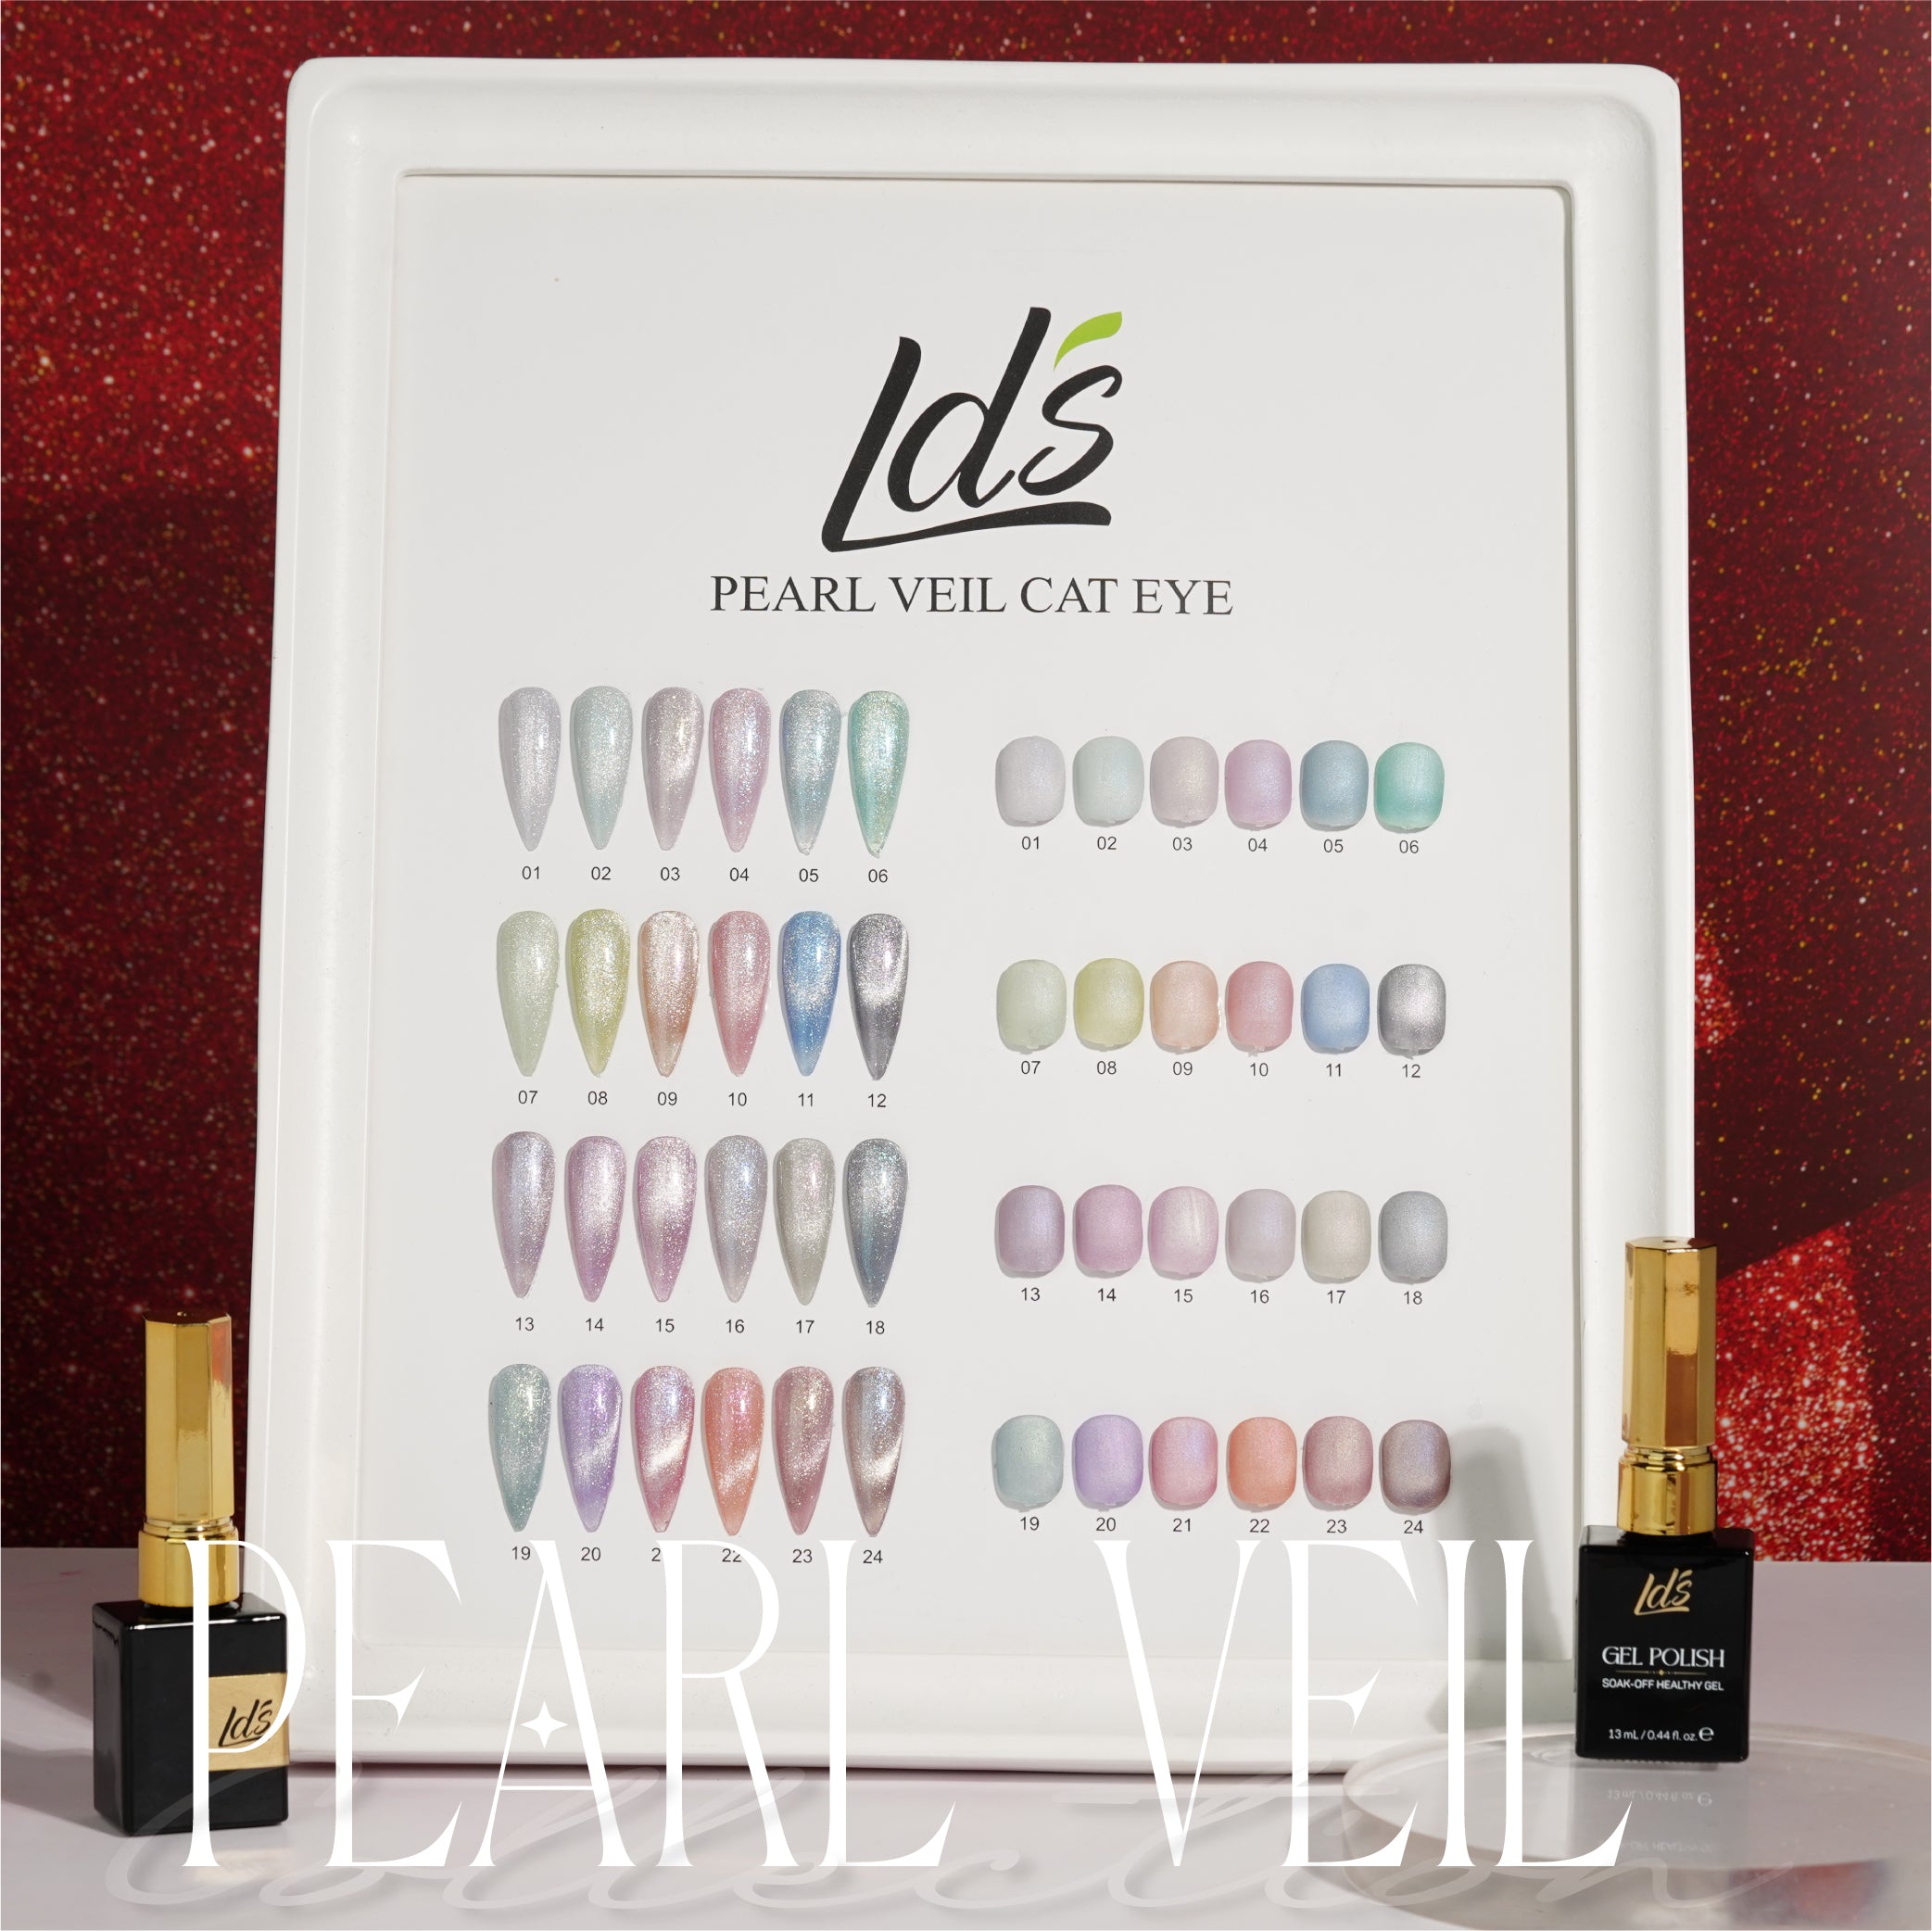 LDS Pearl Veil Cat Eye Collection